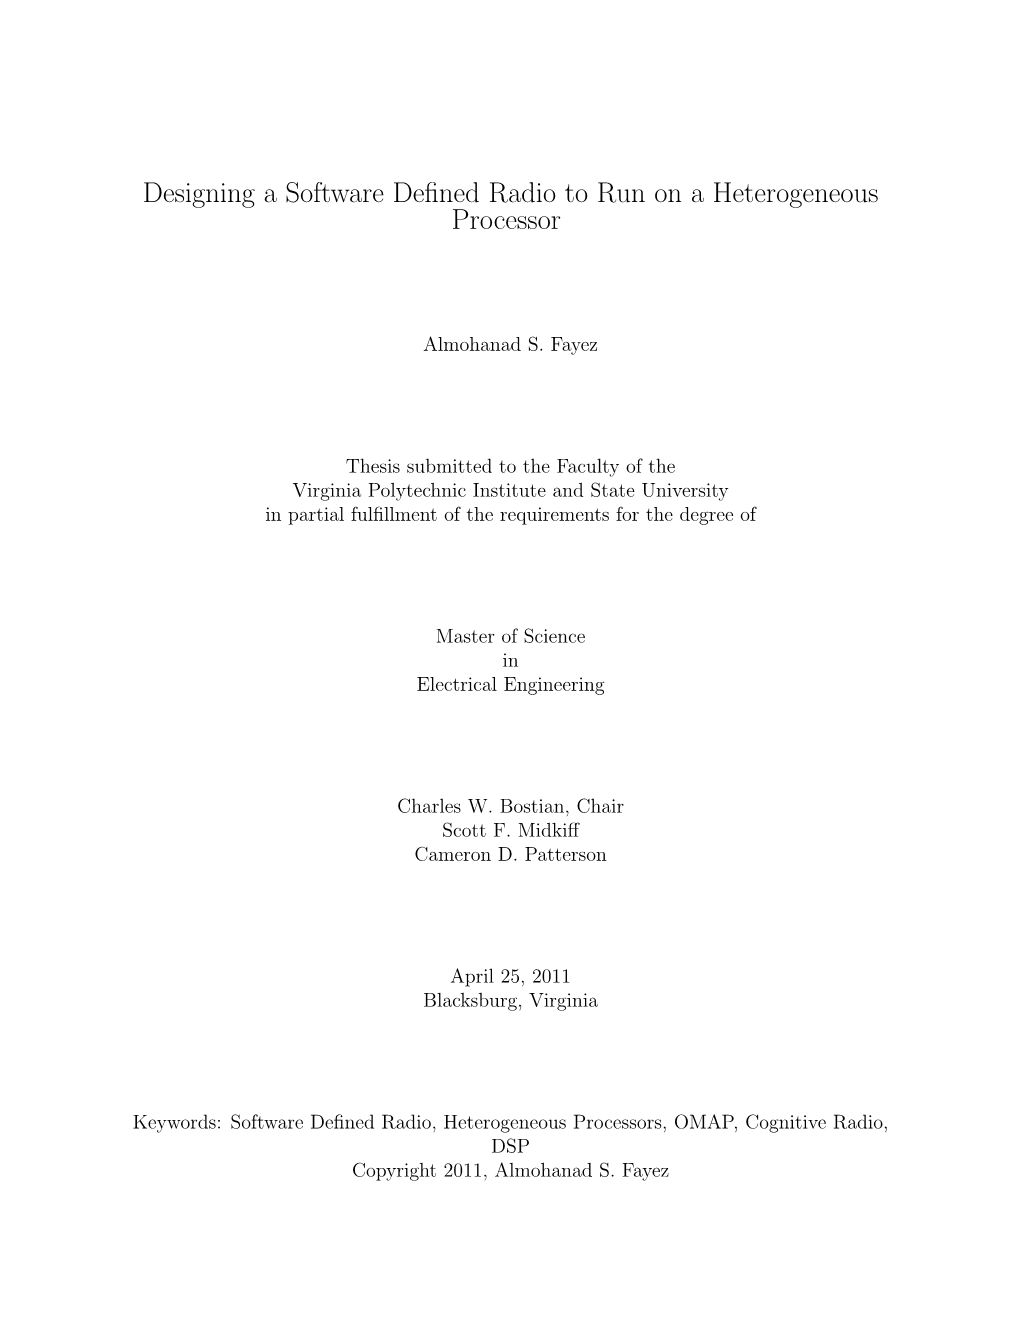 Designing a Software Defined Radio to Run on a Heterogeneous